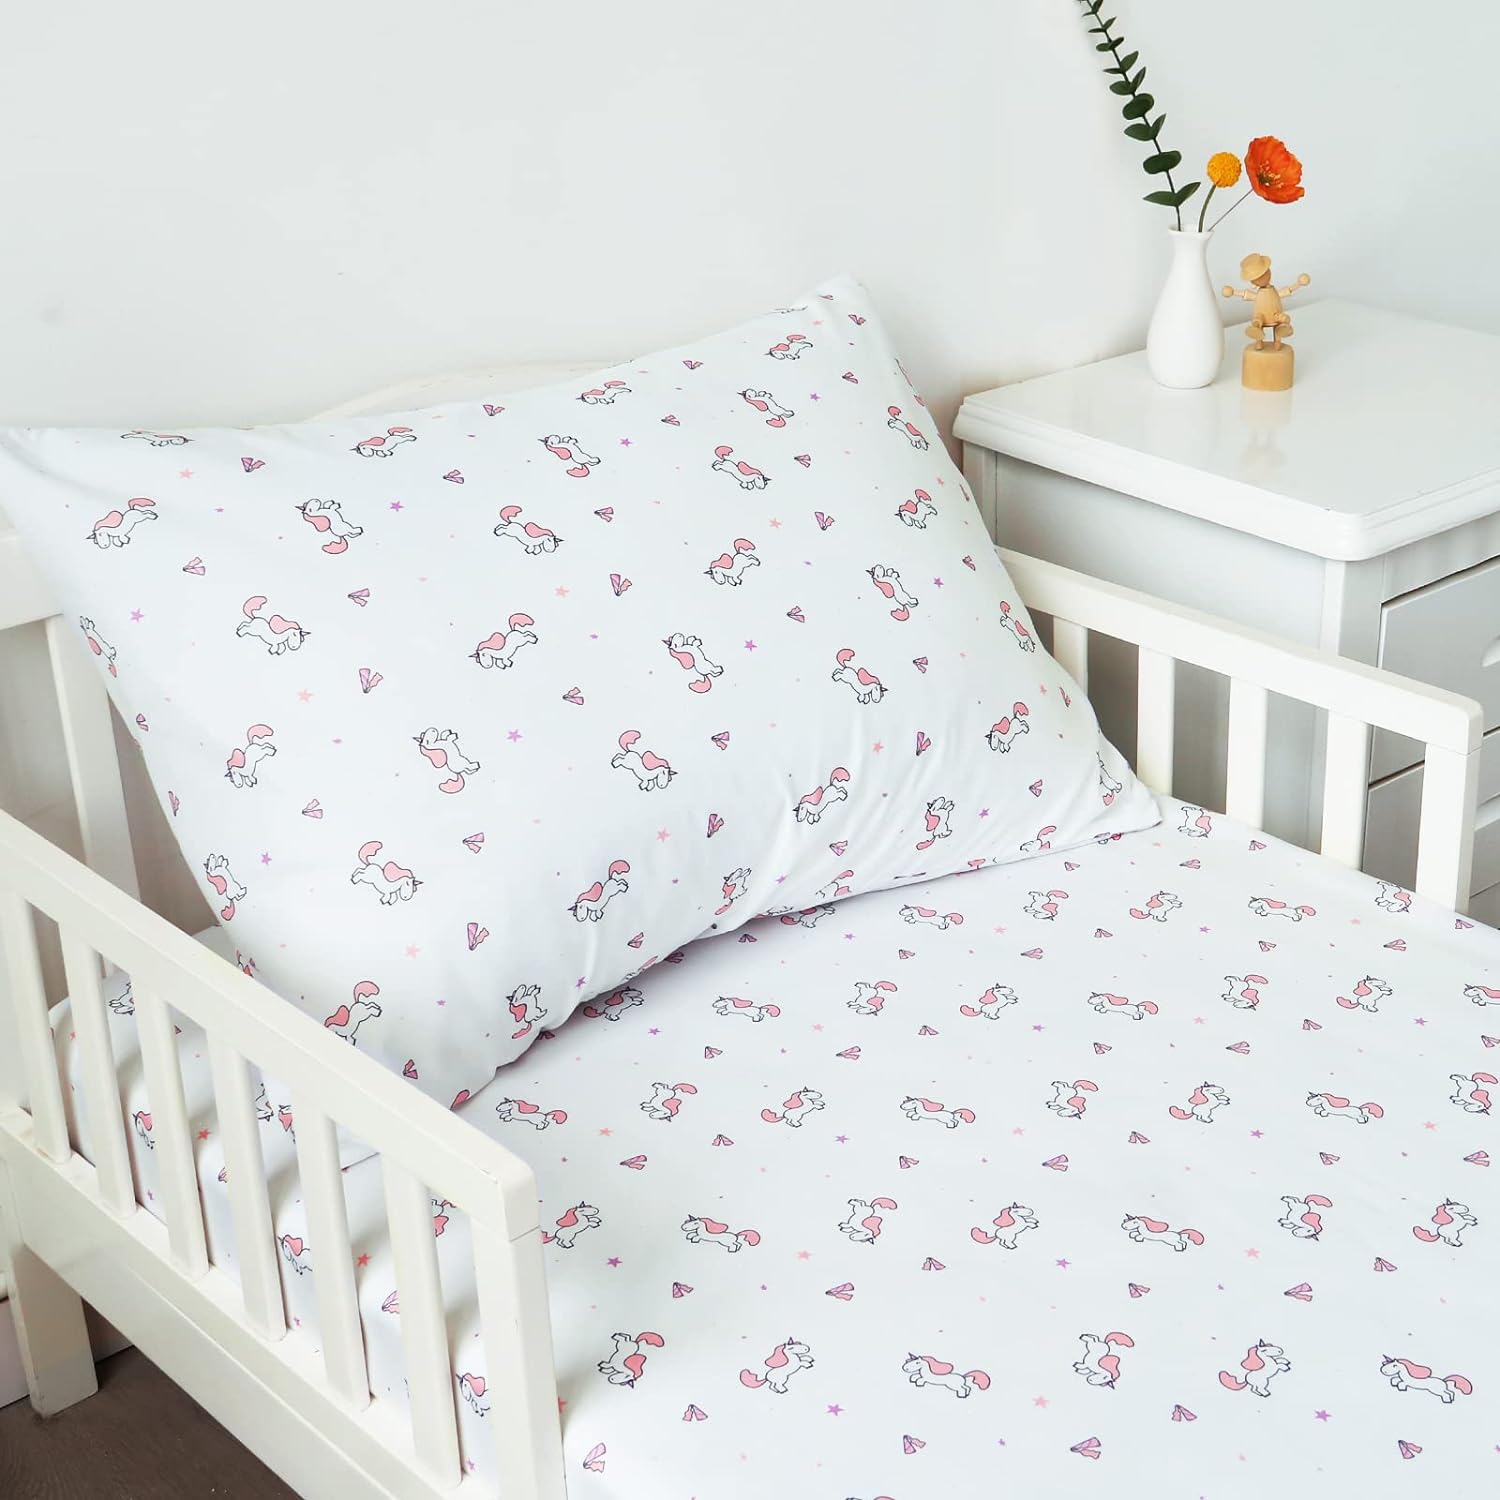 Toddler Bedding Set - 2 Pieces, Includes a Crib Fitted Sheet and Envelope Pillowcase, Soft and Breathable, White Horse - Biloban Online Store